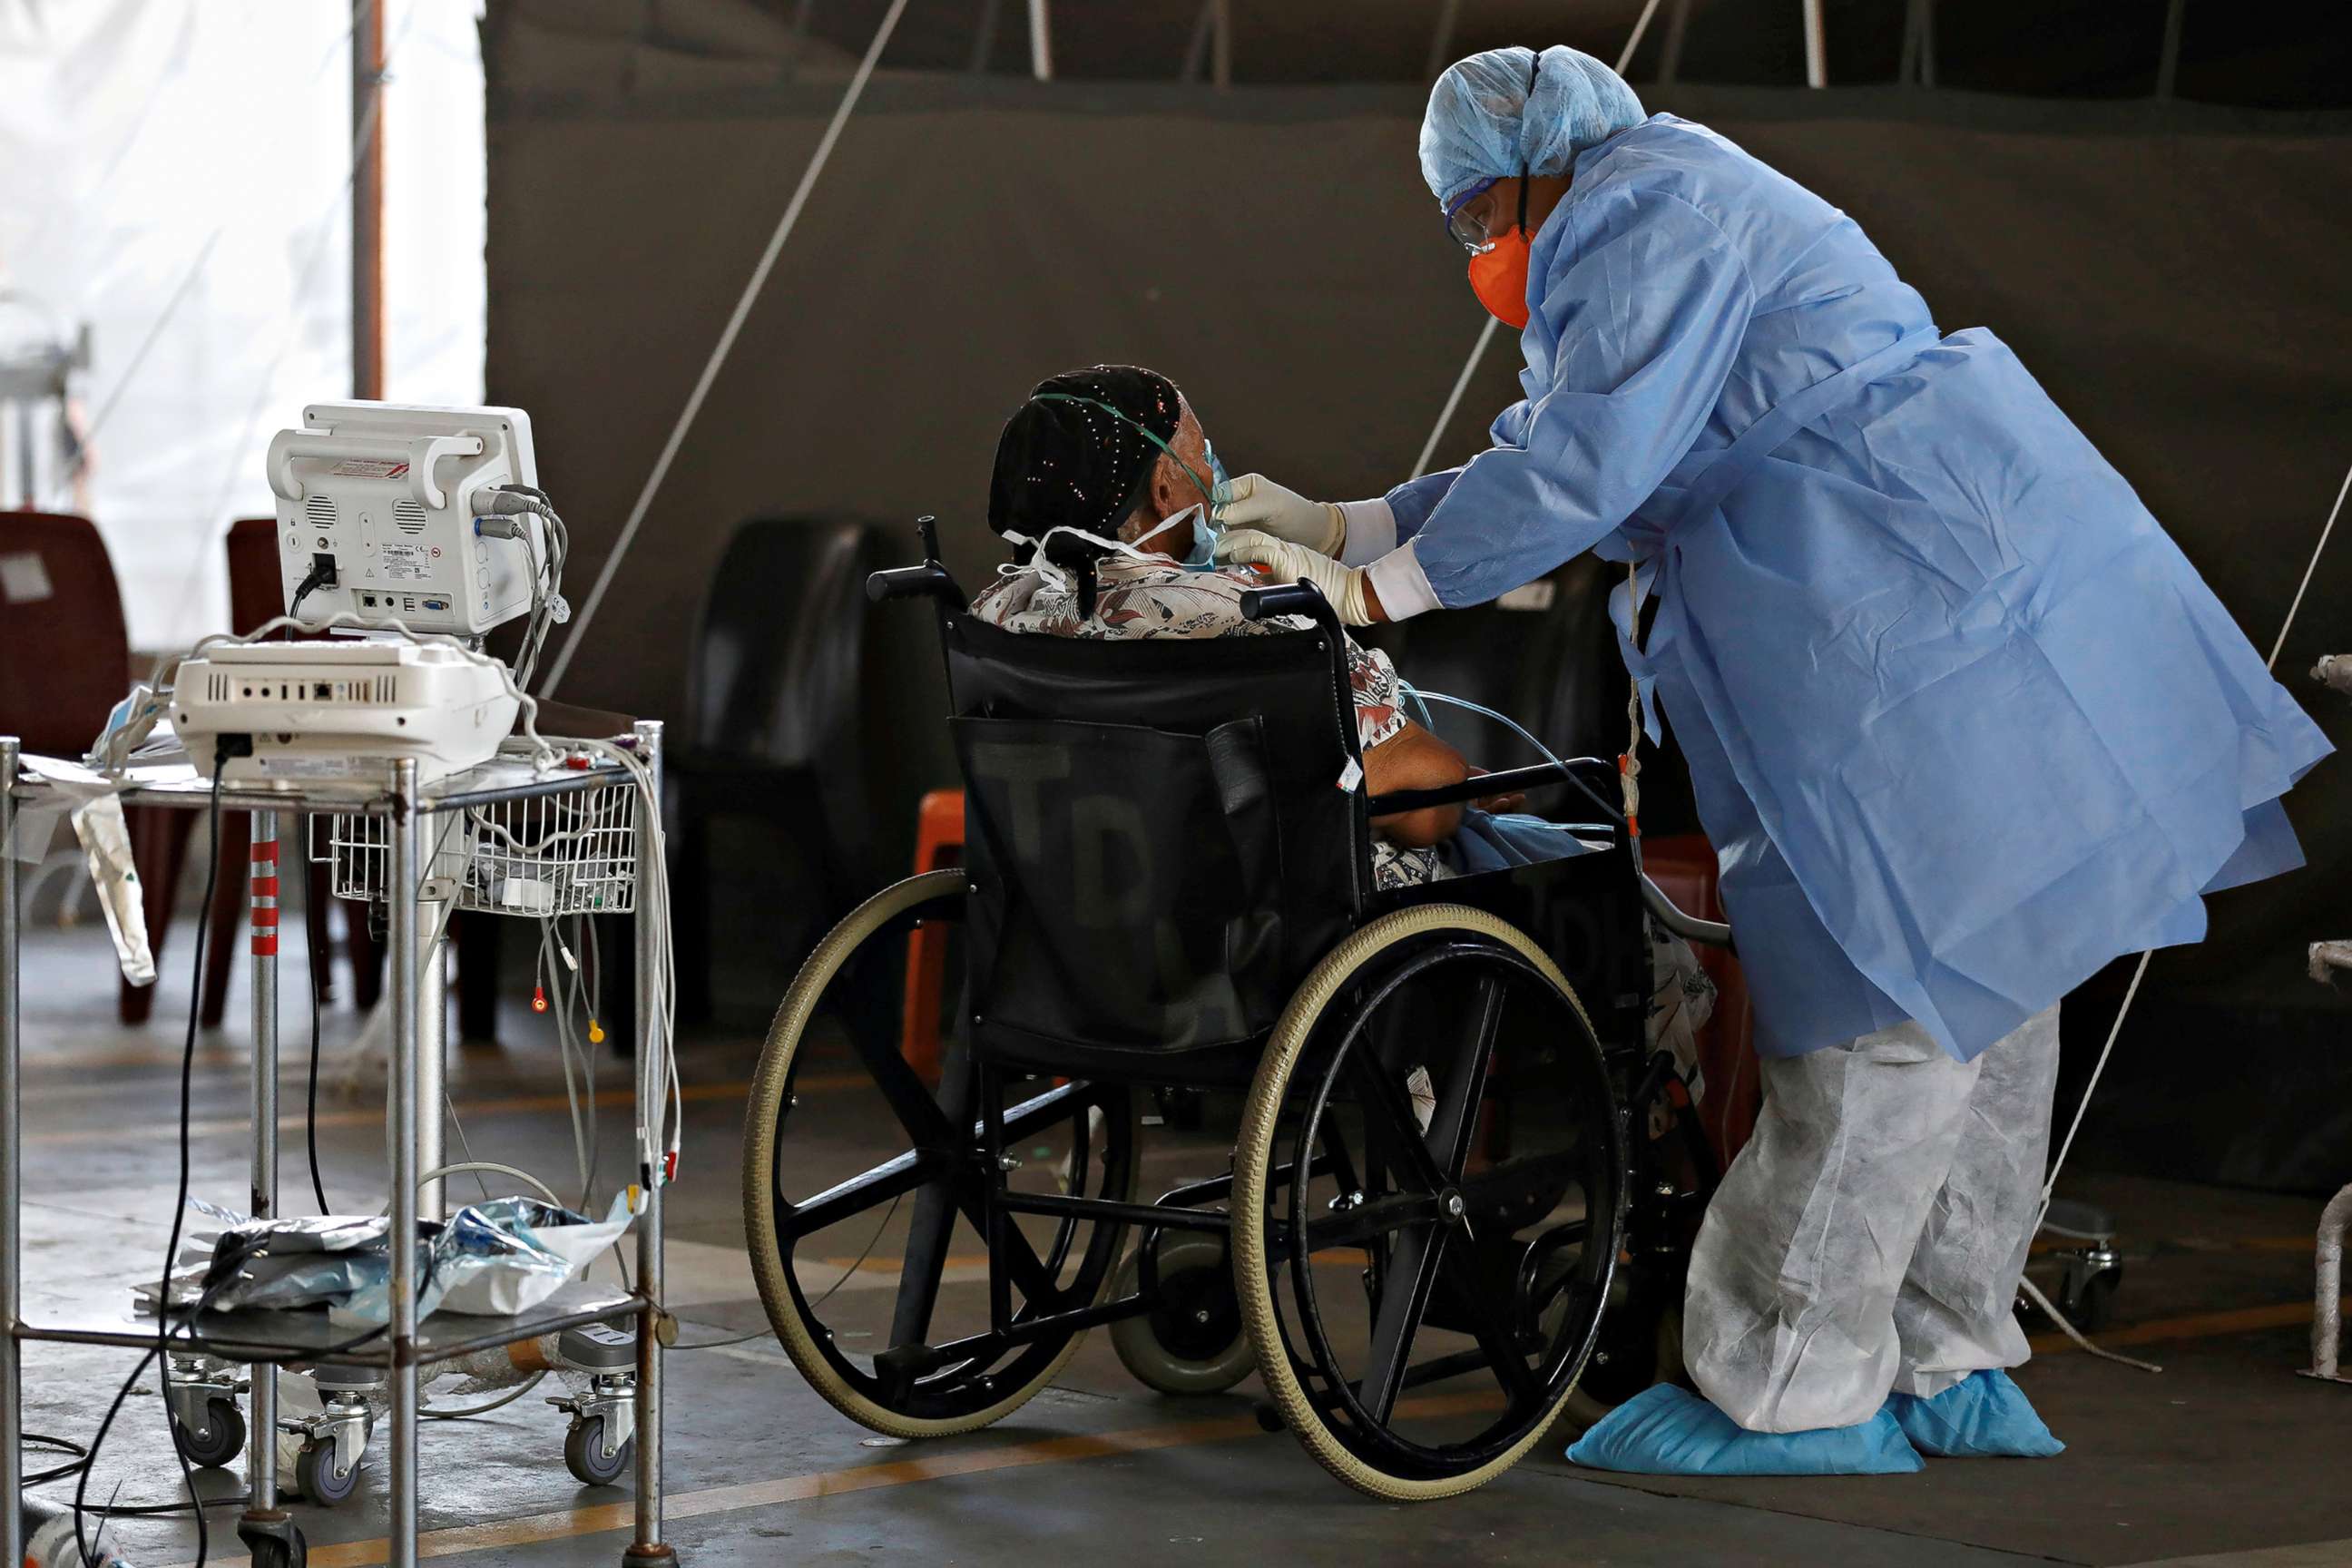 PHOTO: Healthcare workers tend to a patient at a temporary ward set up during the COVID-19 outbreak at Steve Biko Academic Hospital in Pretoria, South Africa, Jan. 19, 2021.